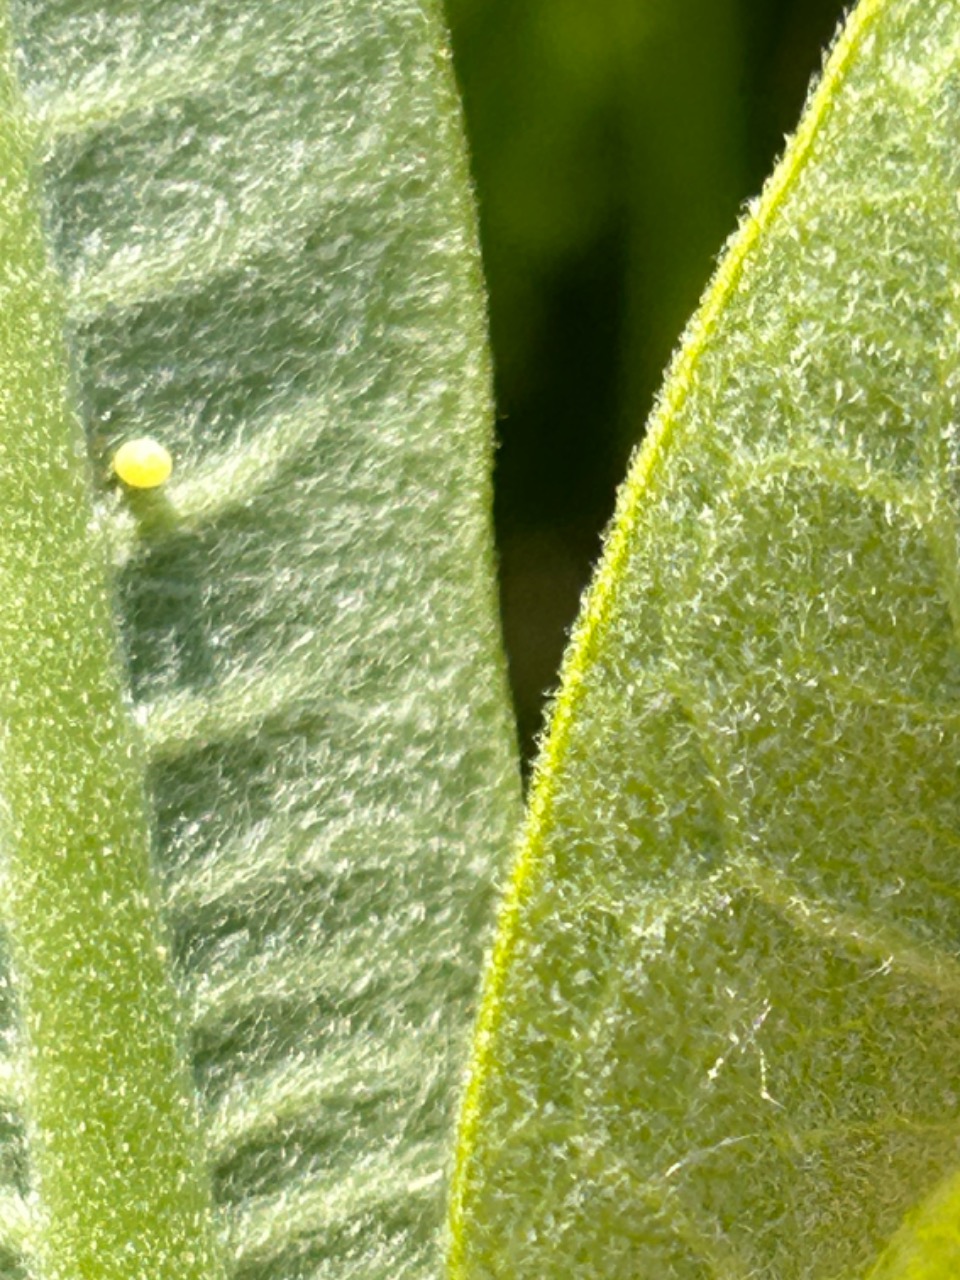 An up-close photo of a monarch egg on the underside of a leaf